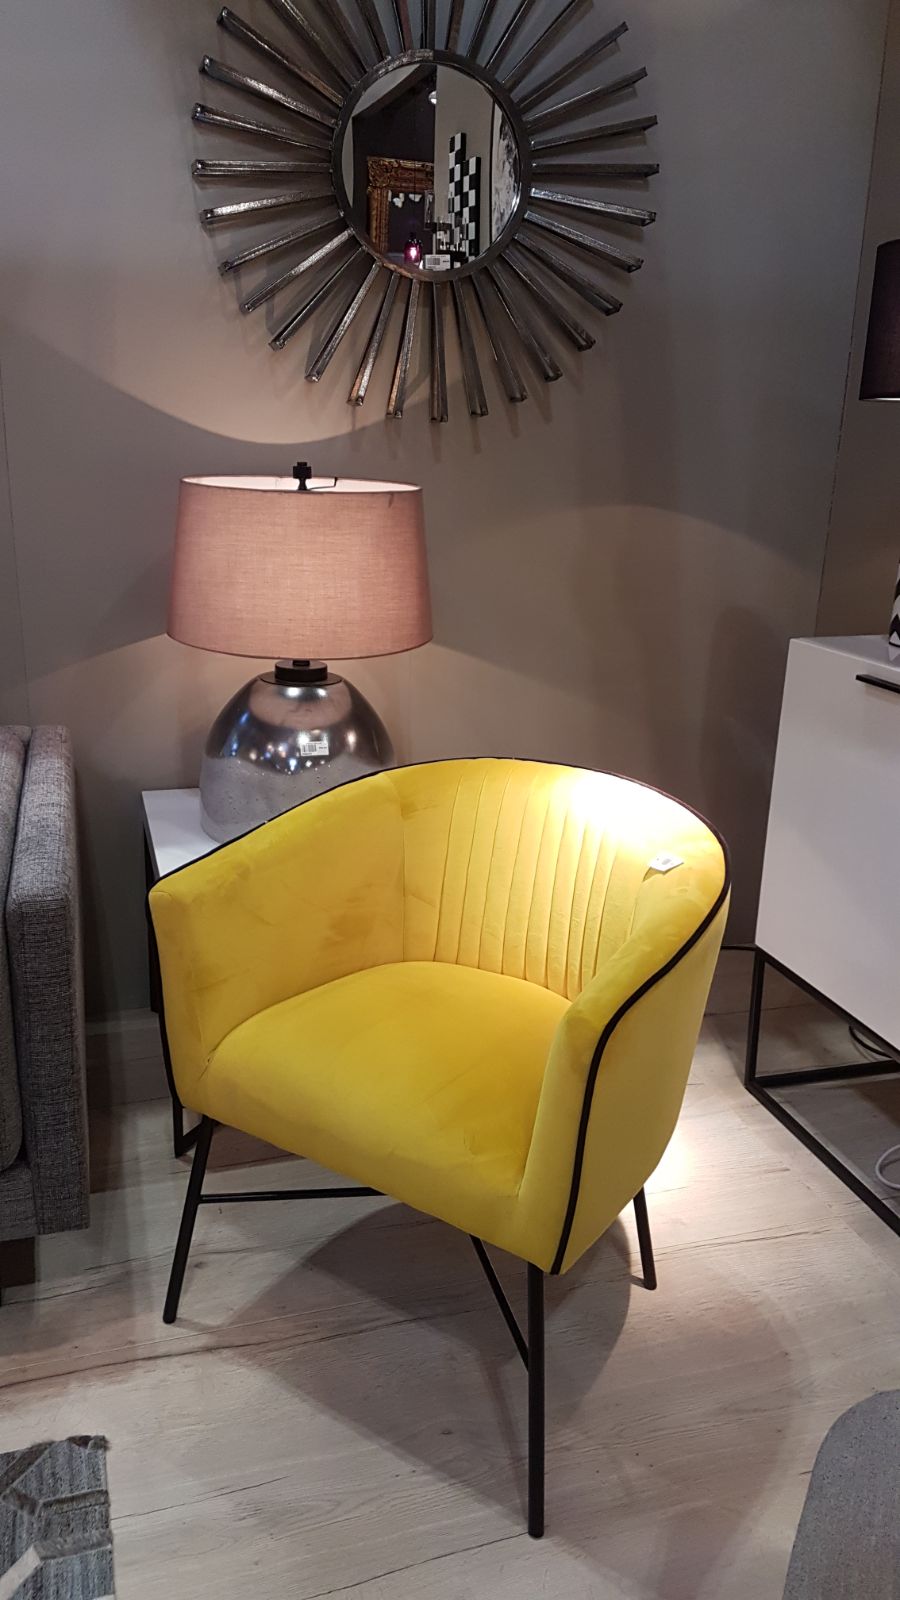 image of a mustard yellow armchair